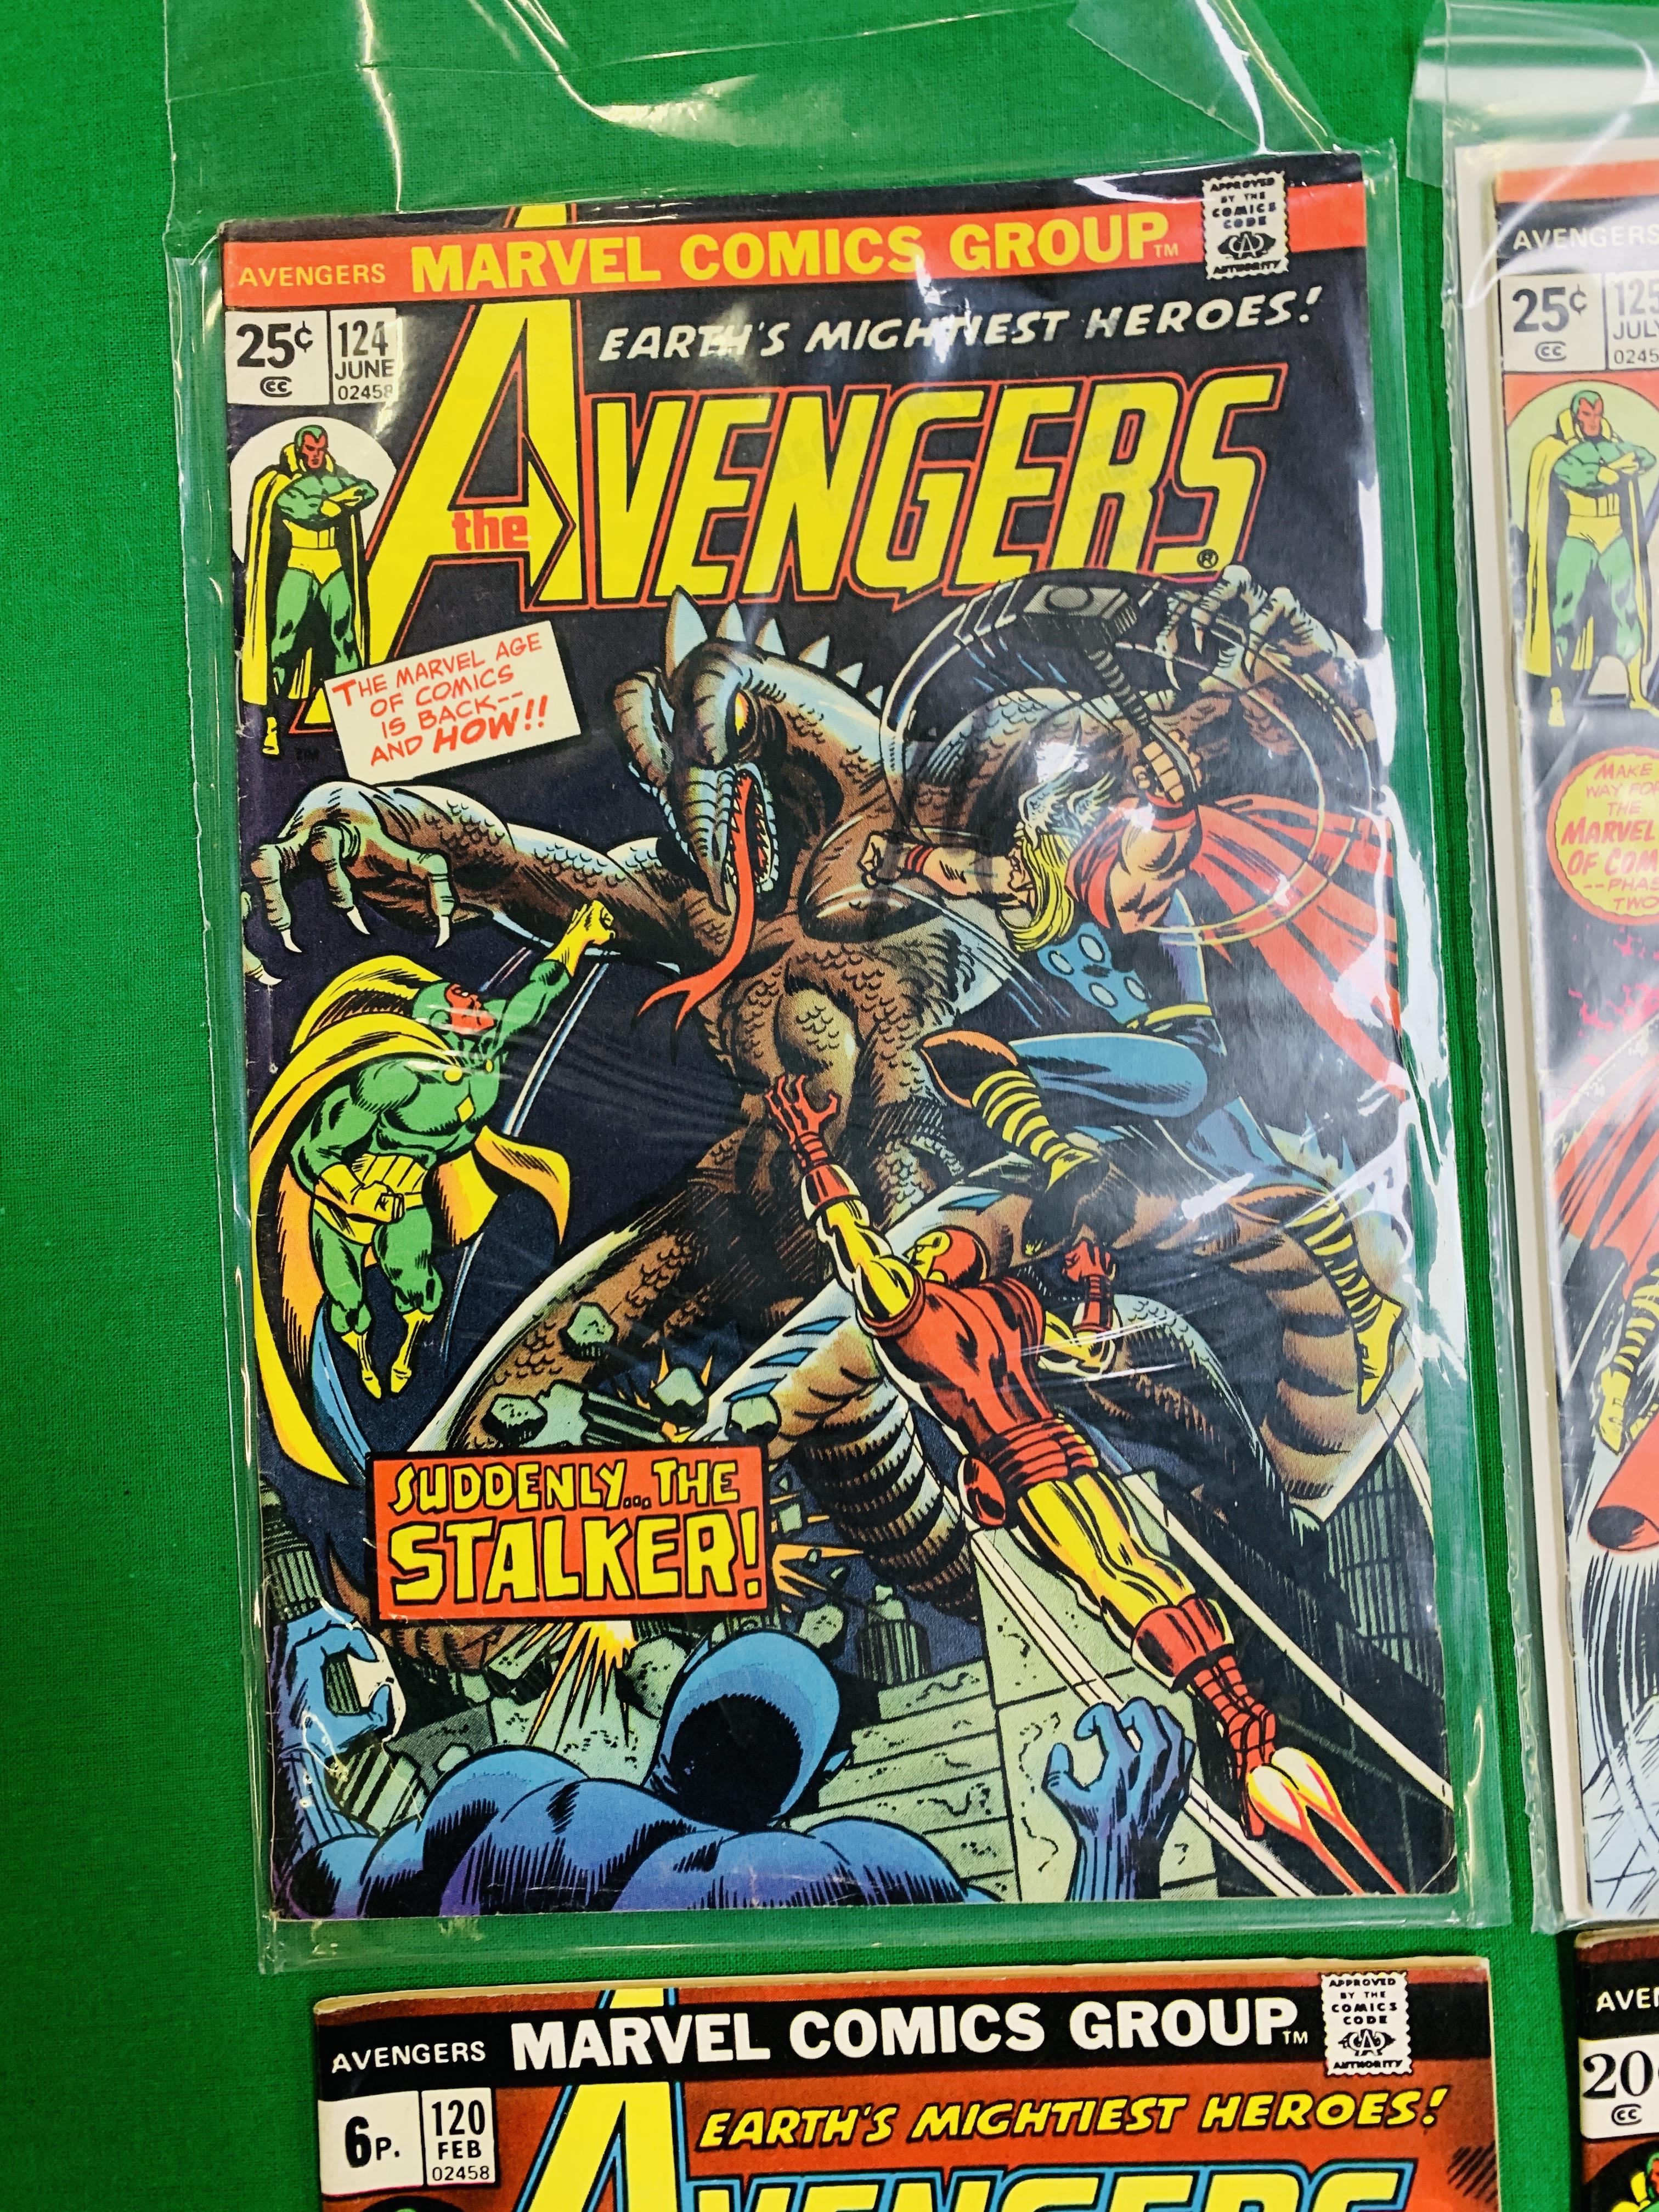 MARVEL COMICS THE AVENGERS NO. 101 - 299, MISSING ISSUES 103 AND 110. - Image 13 of 130